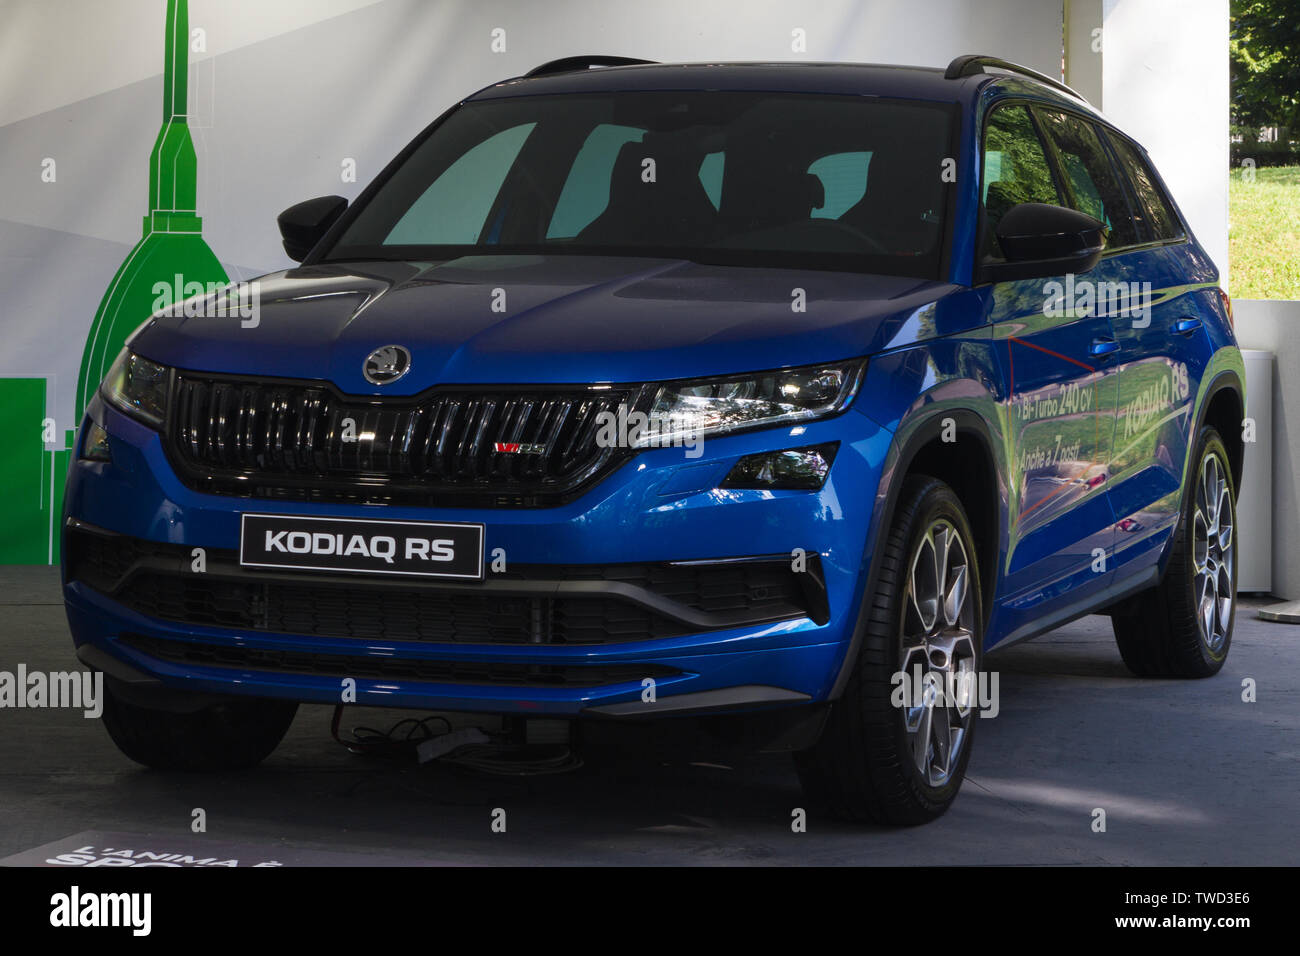 A Skoda Kodiaq RS. 2019 edition of Parco Valentino car show hosts cars by many brands and car designers in Valentino Park in Torino, Italy. Stock Photo